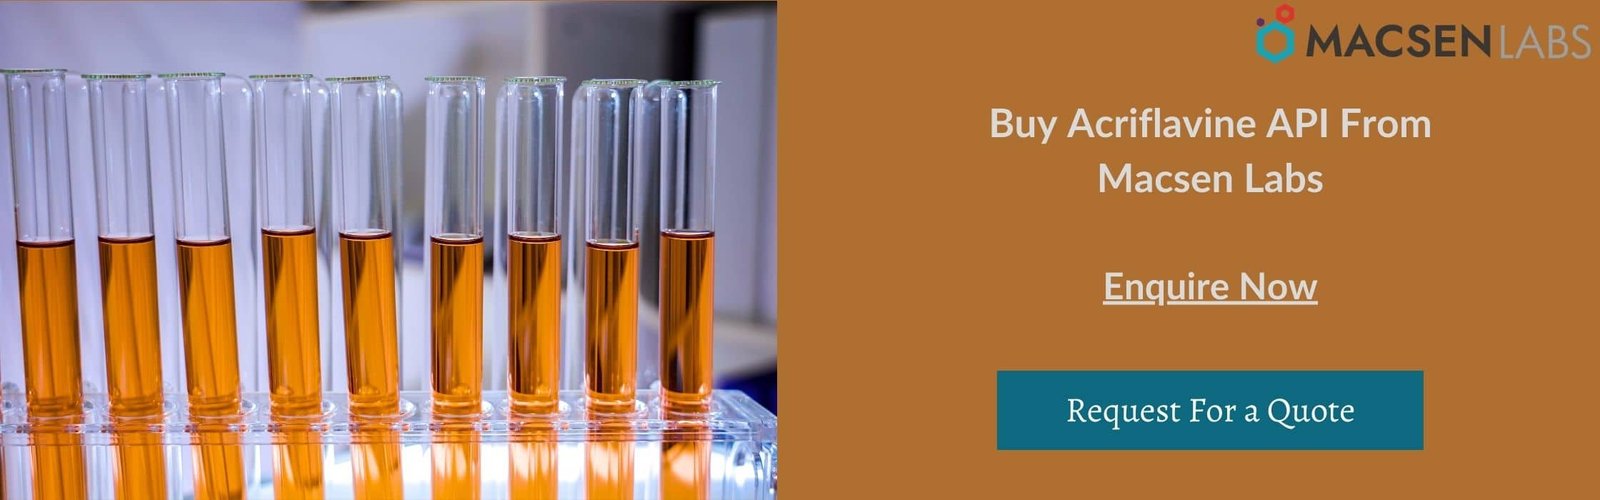 Buy Acriflavine API From Macsen Labs